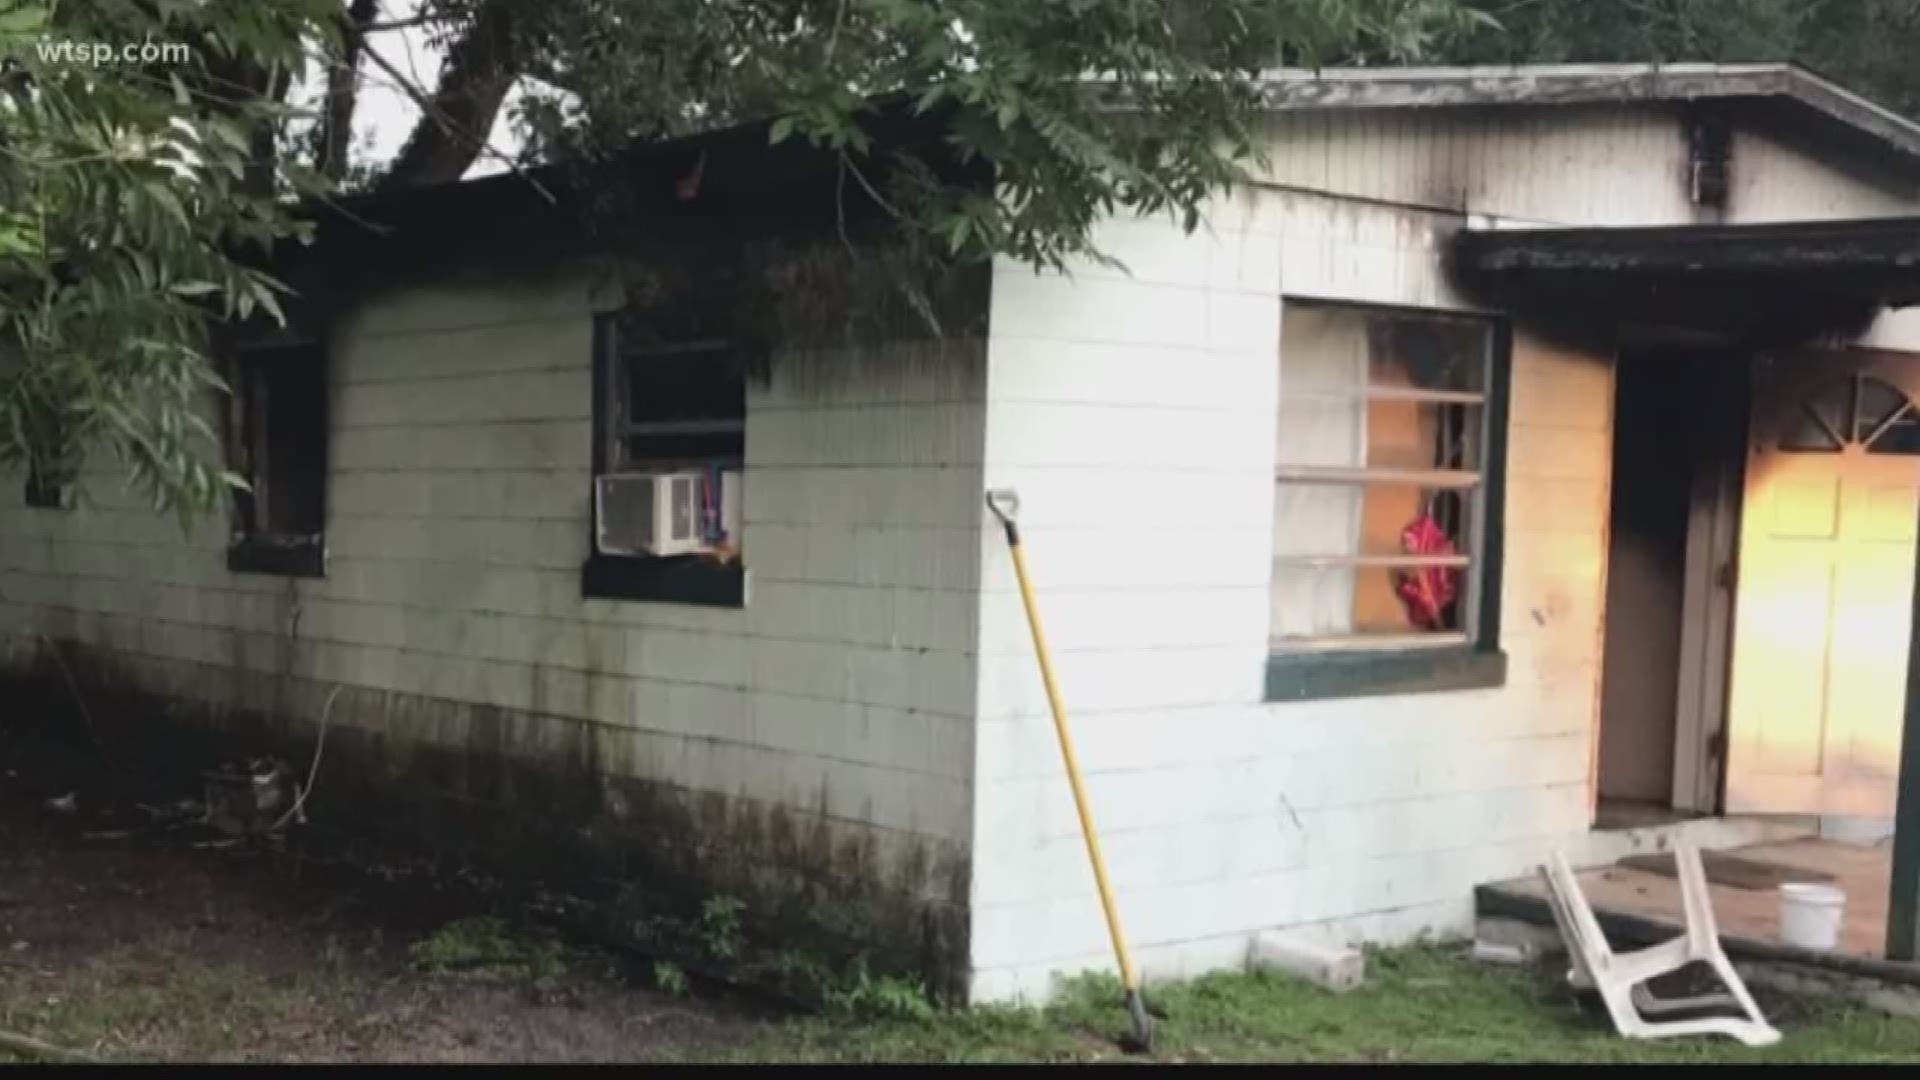 Fire crews responded to a deadly fire in Brooksville.

Firefighters said neighbors called in the fire Sunday on Twigg Street.

Crews said when they went inside, they found one person dead.